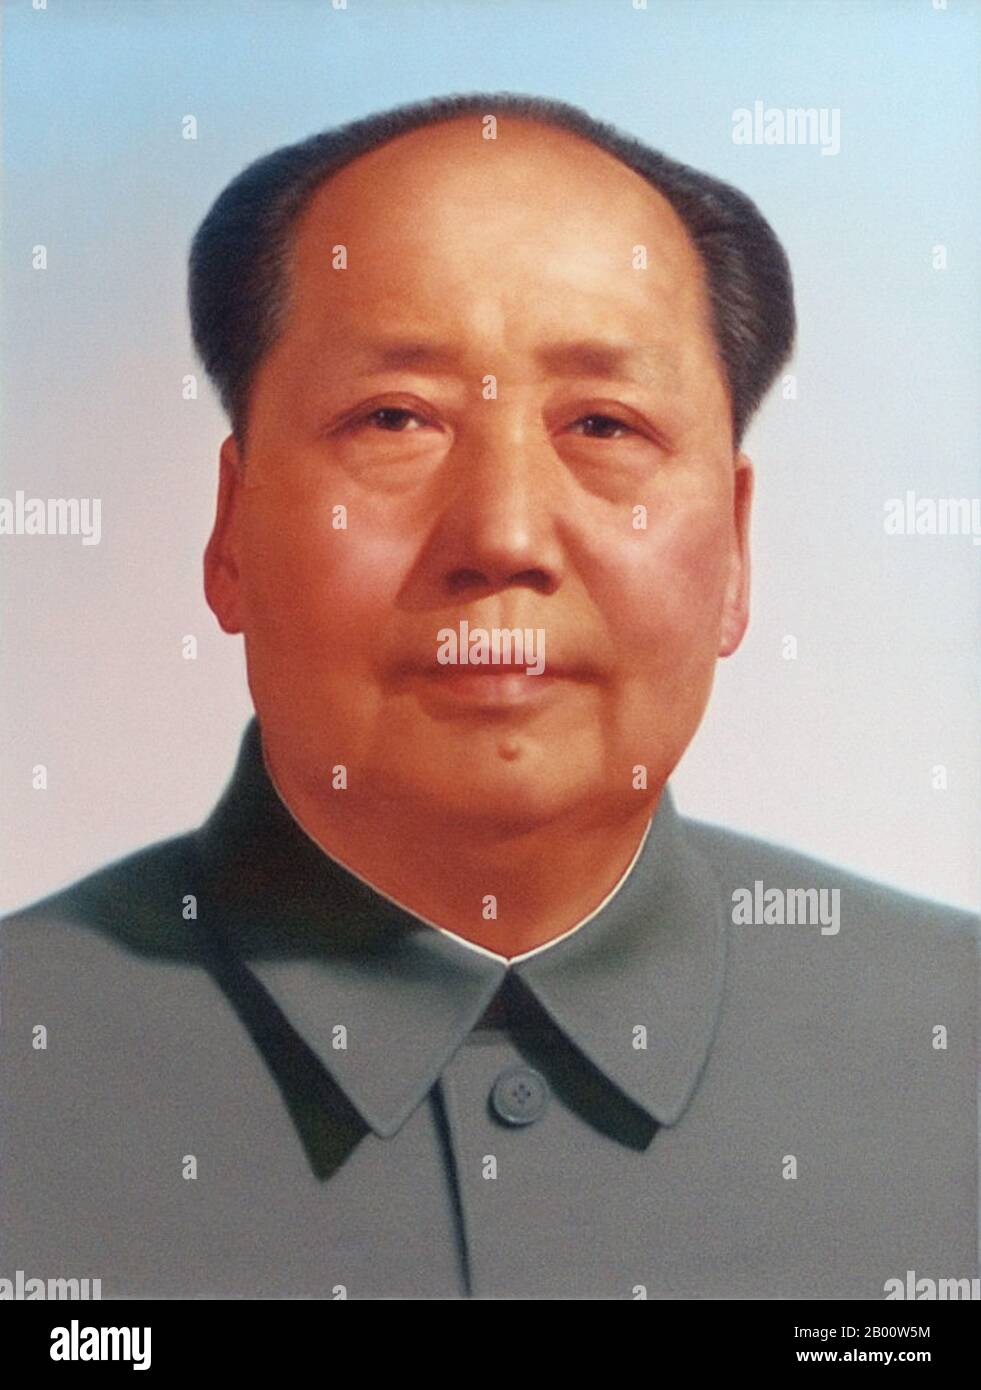 China: Official portrait of Mao Zedong at Tiananmen Gate, Beijing.   Mao Zedong, also transliterated as Mao Tse-tung (26 December 1893 – 9 September 1976), was a Chinese communist revolutionary, guerrilla warfare strategist, author, political theorist, and leader of the Chinese Revolution. Commonly referred to as Chairman Mao, he was the architect of the People's Republic of China (PRC) from its establishment in 1949, and held authoritarian control over the nation until his death in 1976. Stock Photo